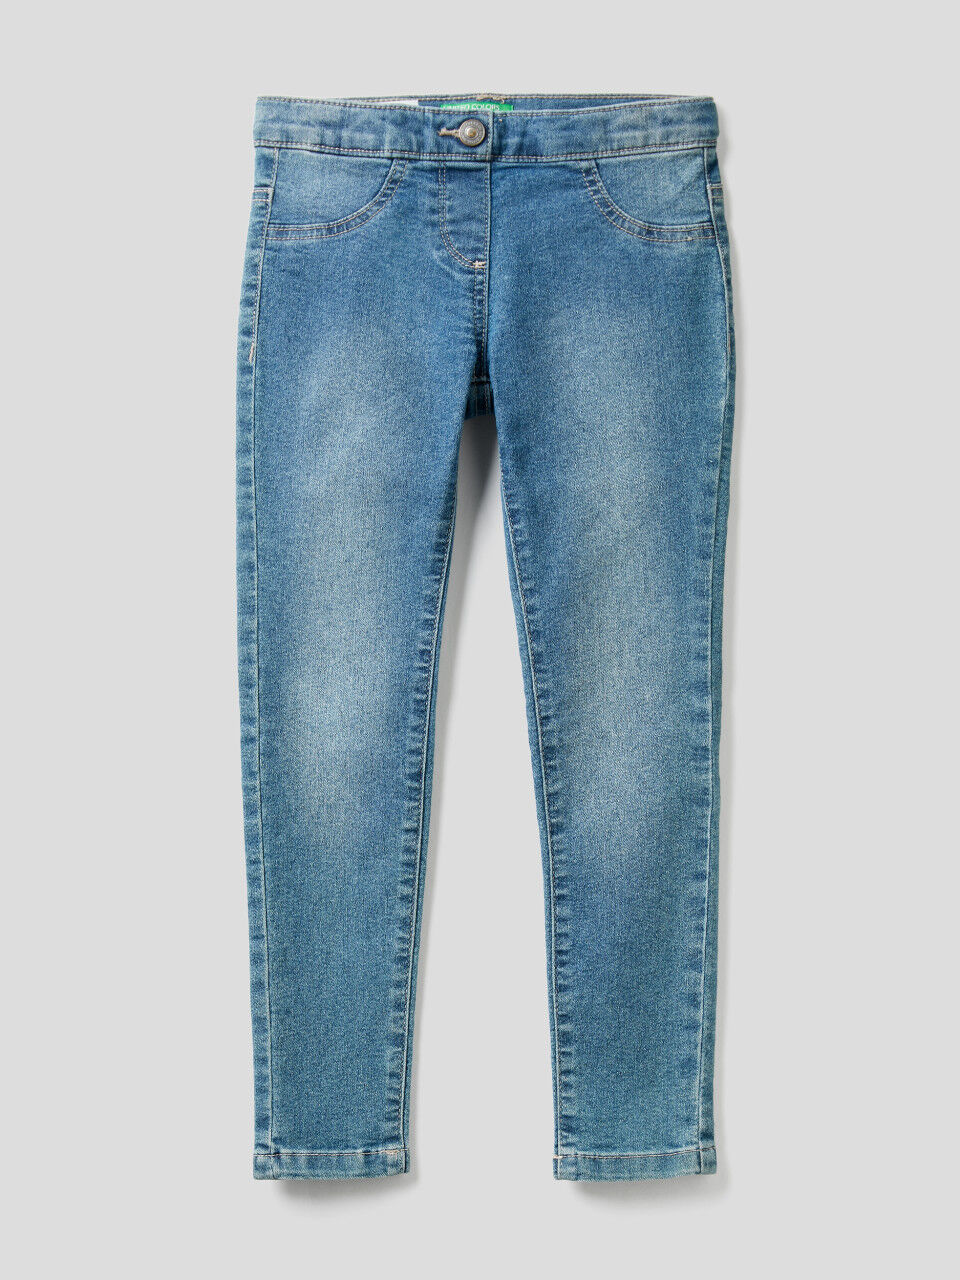 Buy Blue Jeans for Boys by MAX Online | Ajio.com